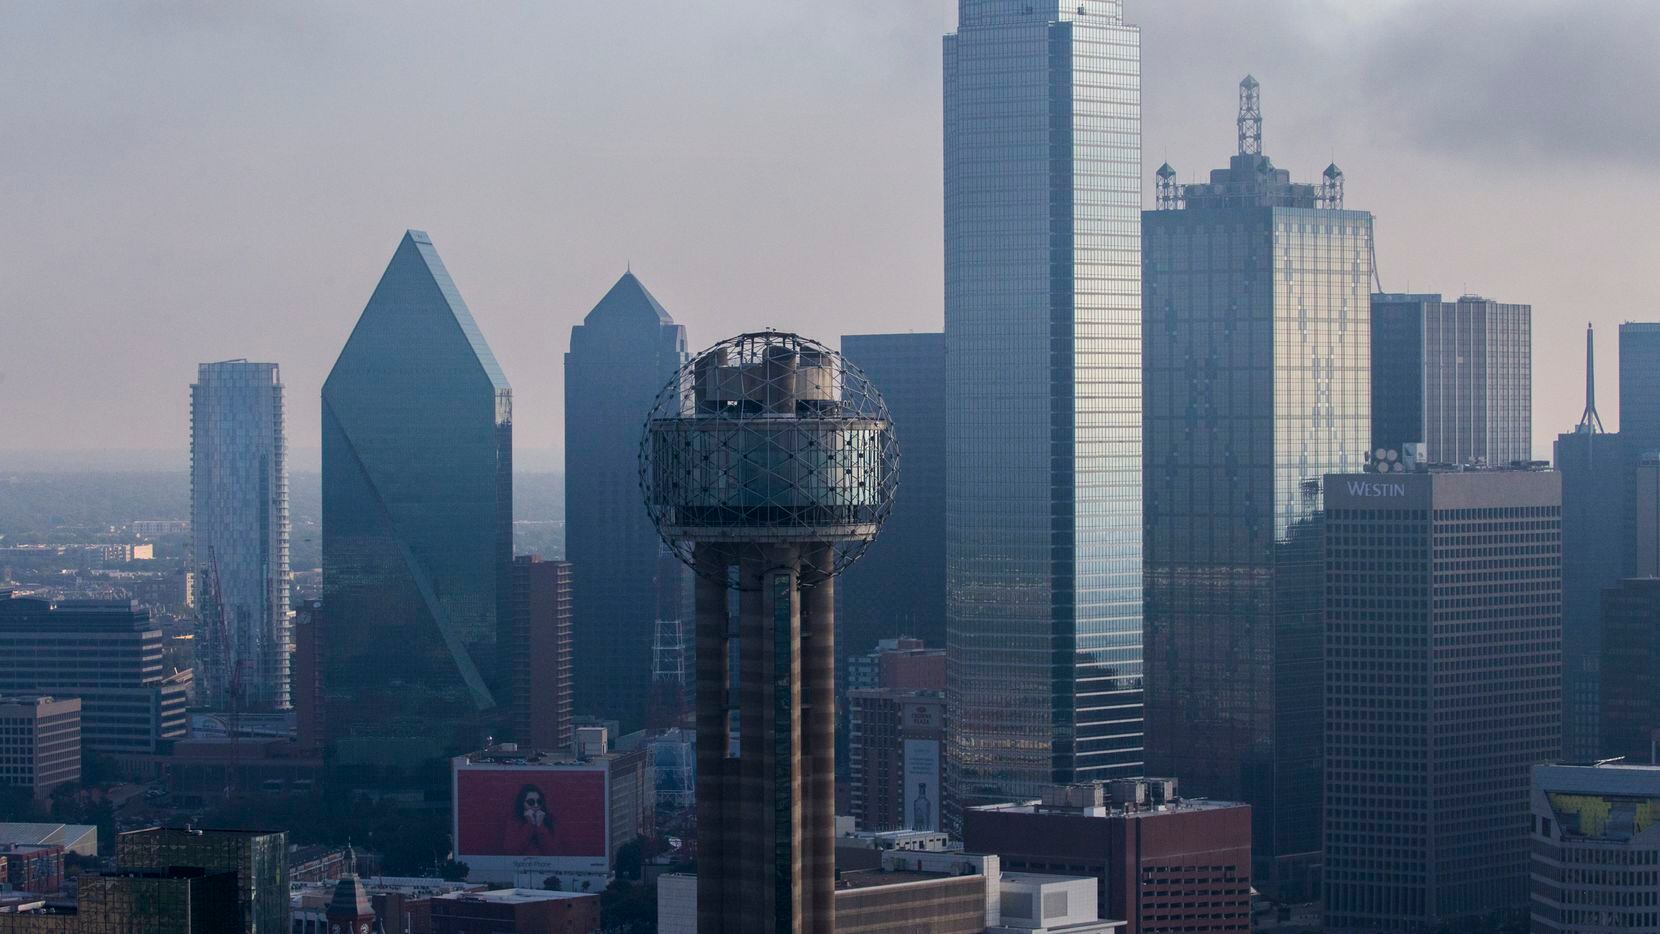 Reunion Tower is probably the most recognized landmark on Dallas' skyline.